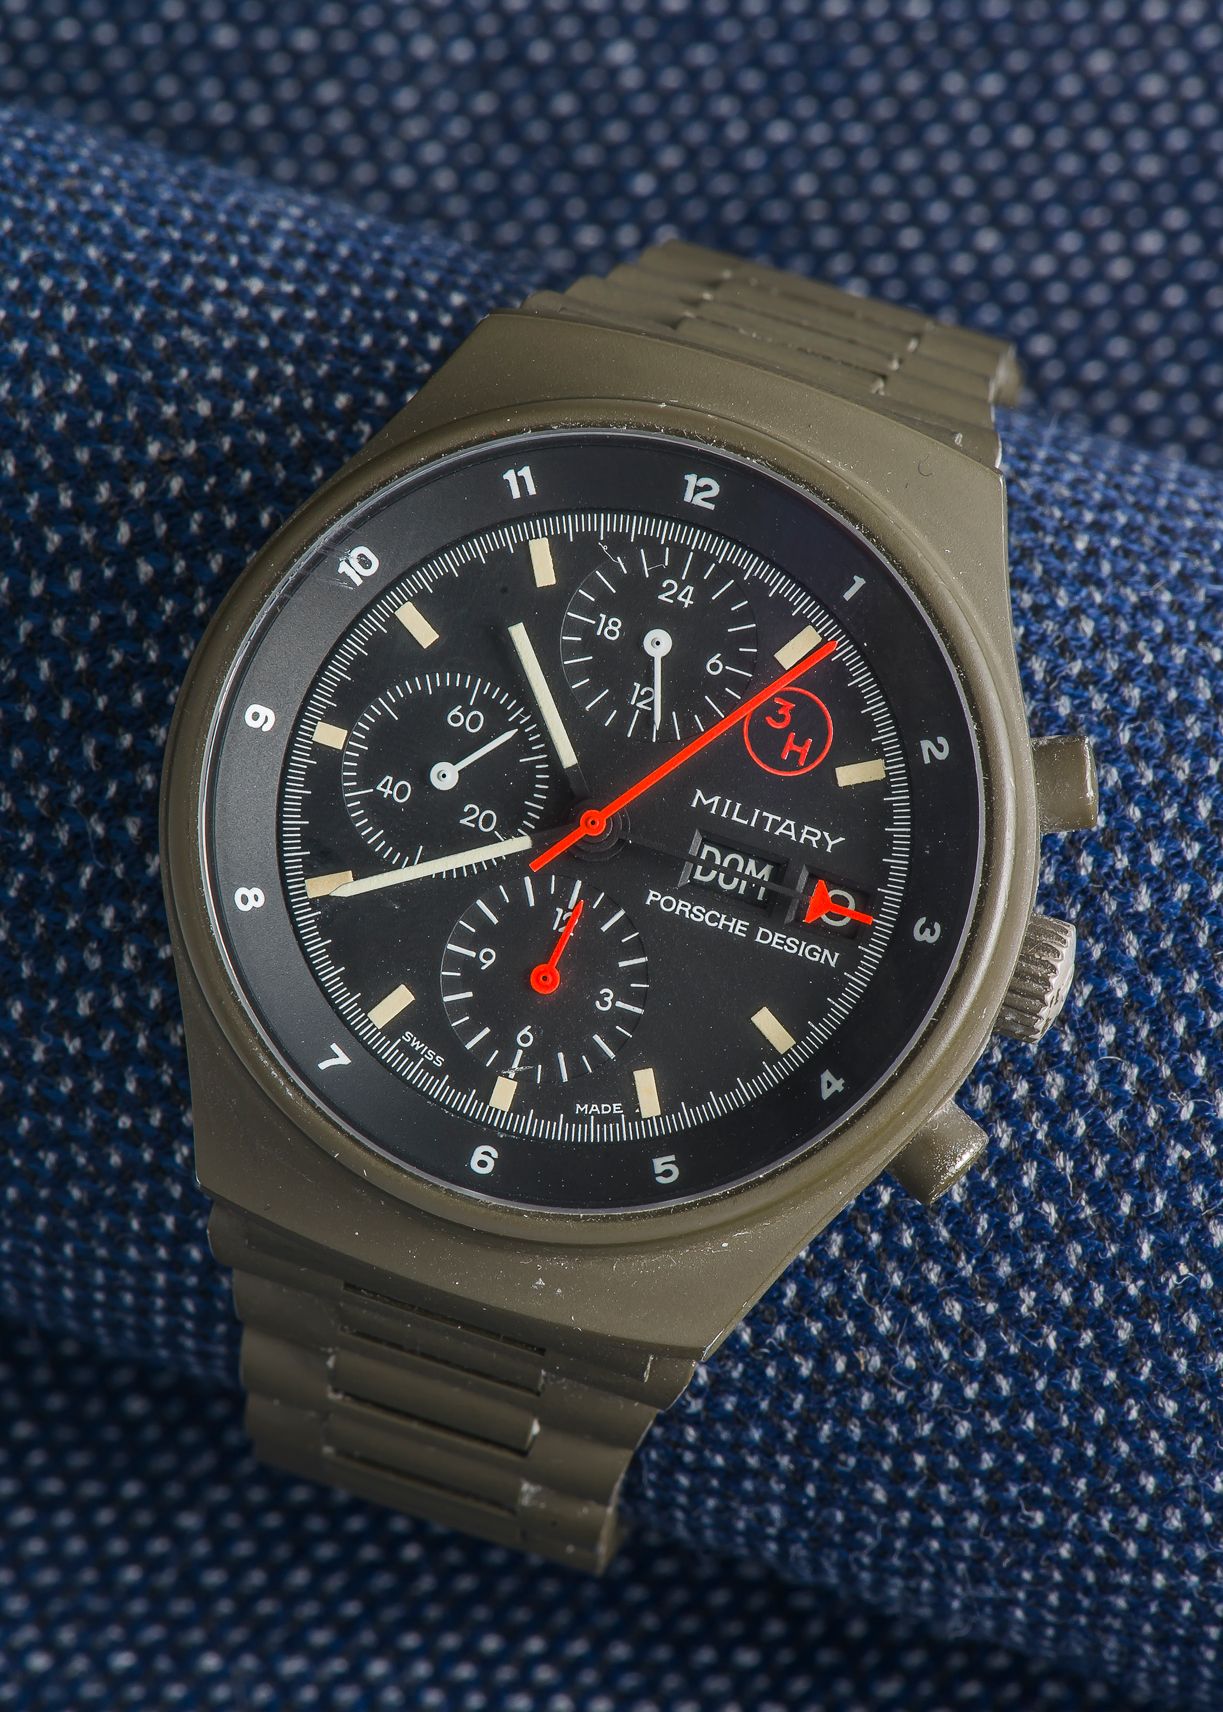 PORSCHE DESIGN, vers 1980 Military chronograph ref 7177 made by Orfina for the I&hellip;